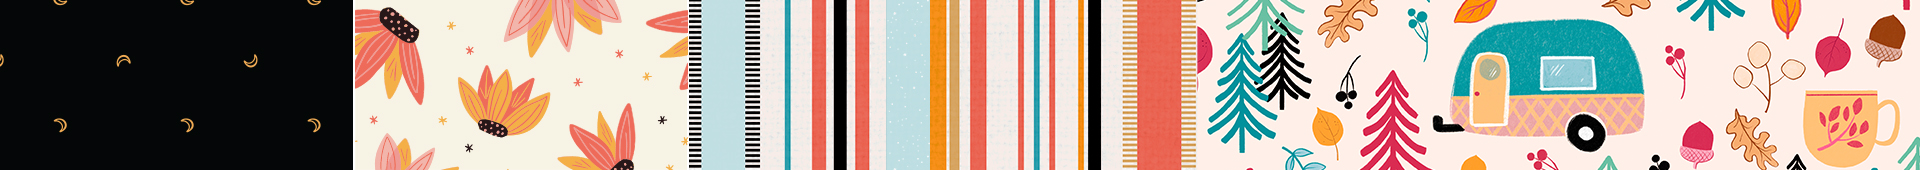 image shows a patchwork of colorful patters in a horizontal strip.